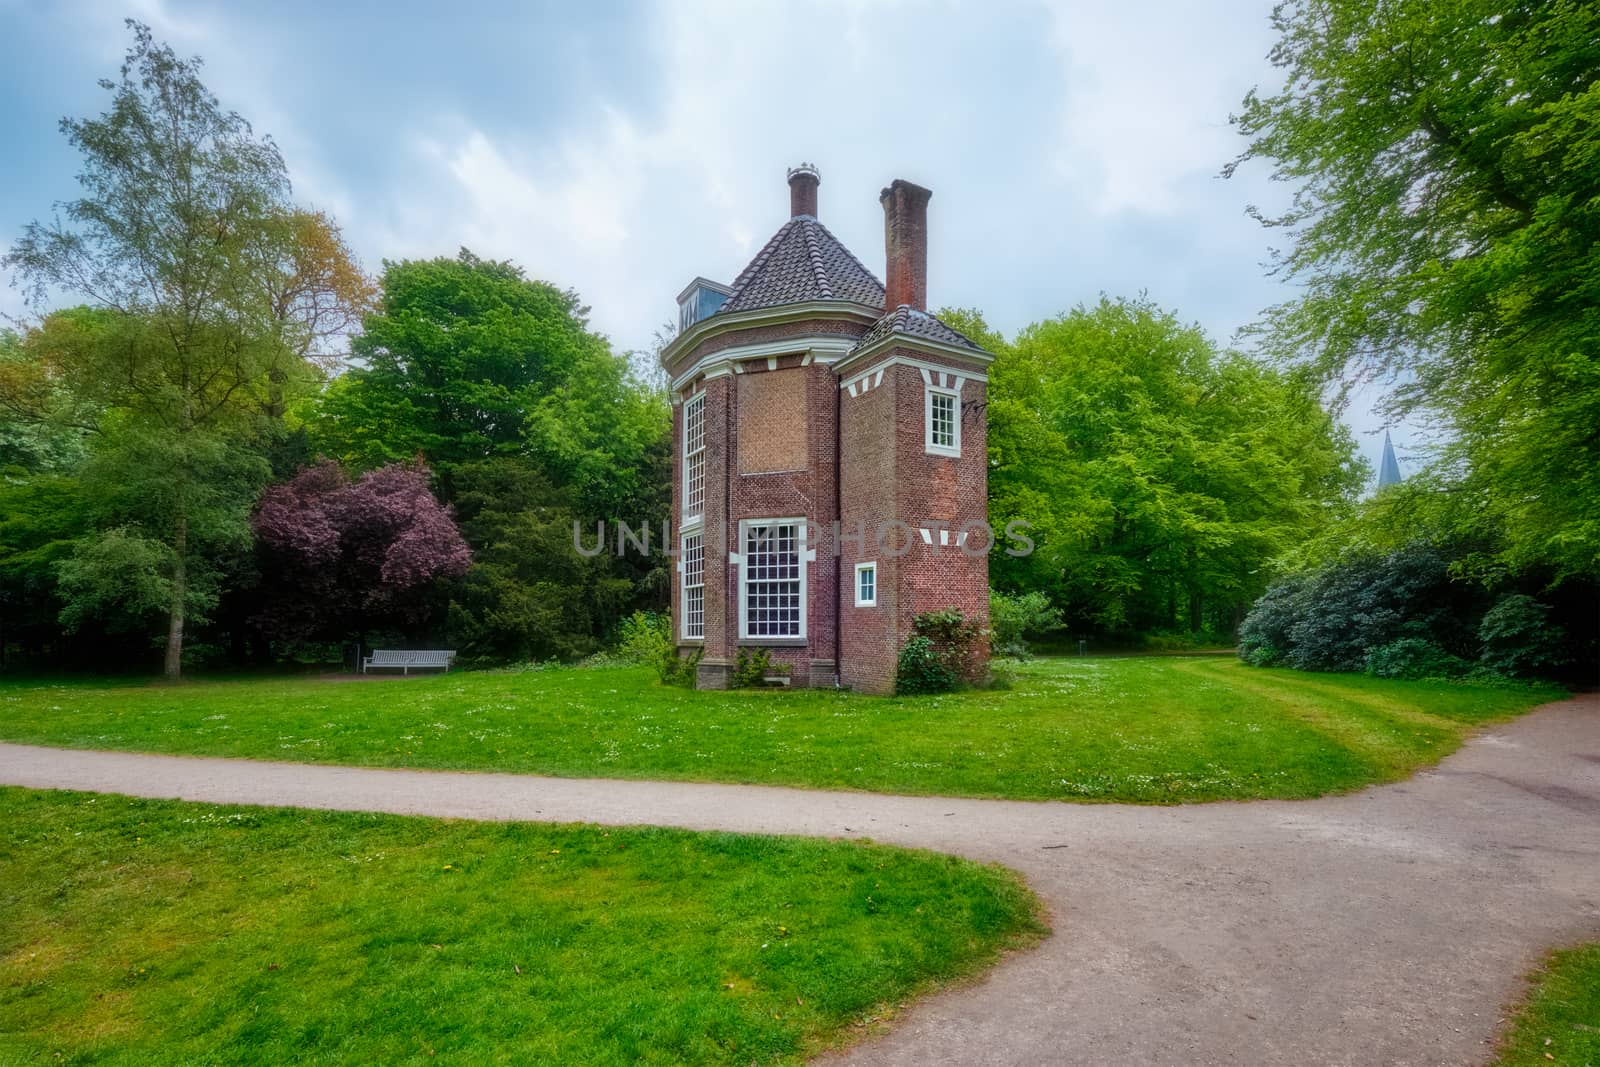 17th century tea house theeuis in Park Arendsdorp, The Hague, Netherlands by dimol